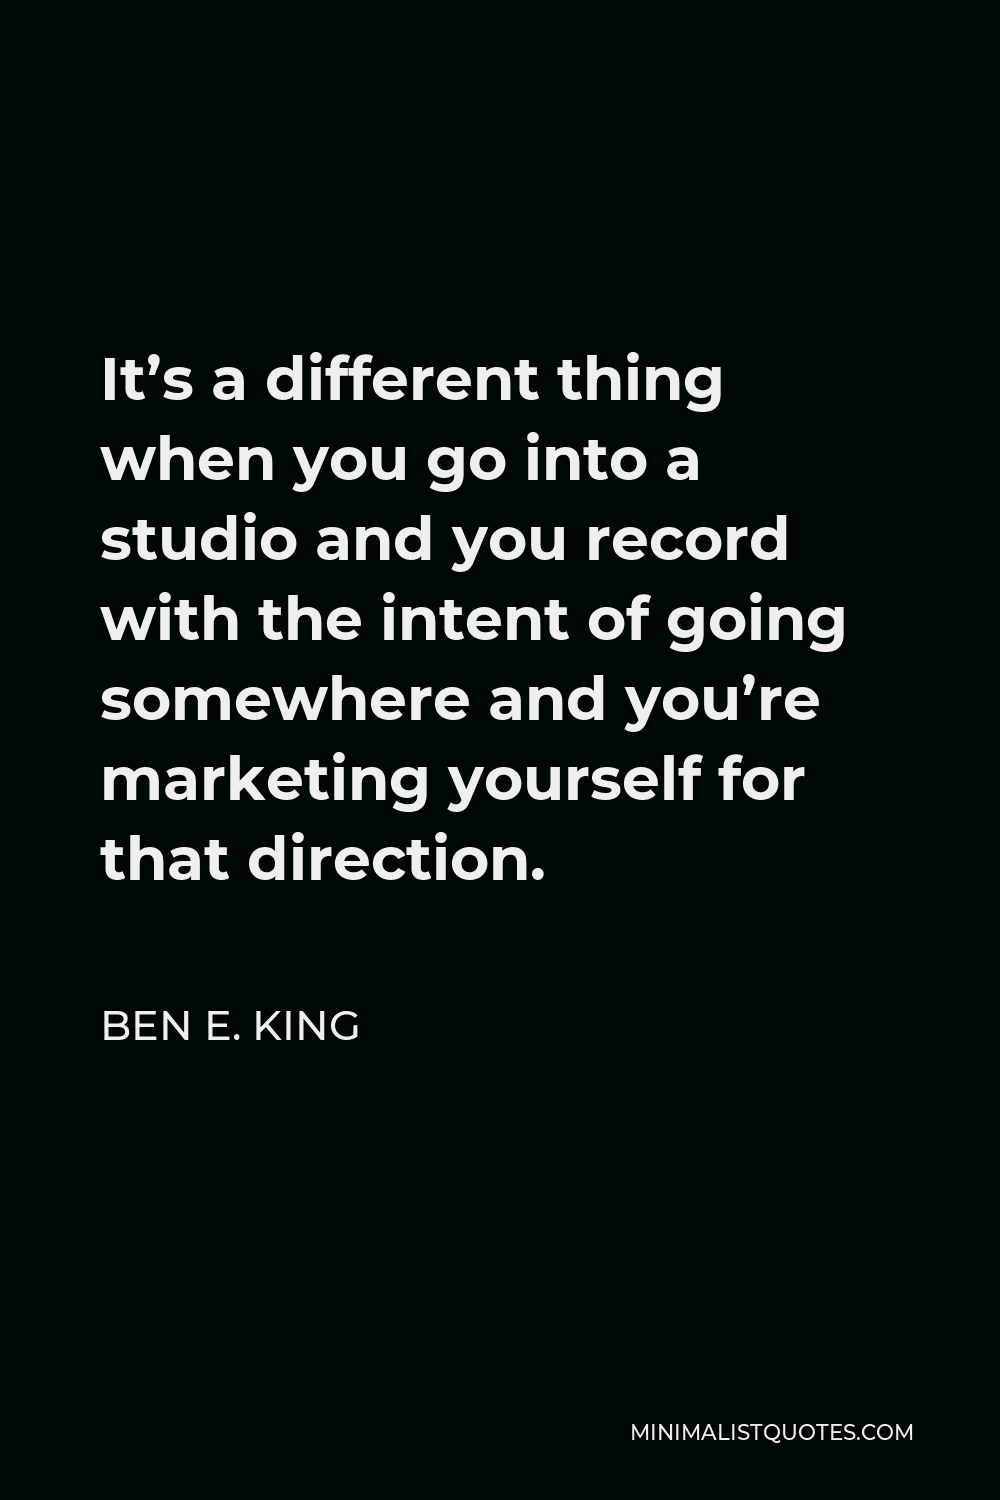 Ben E. King Quote - It’s a different thing when you go into a studio and you record with the intent of going somewhere and you’re marketing yourself for that direction.